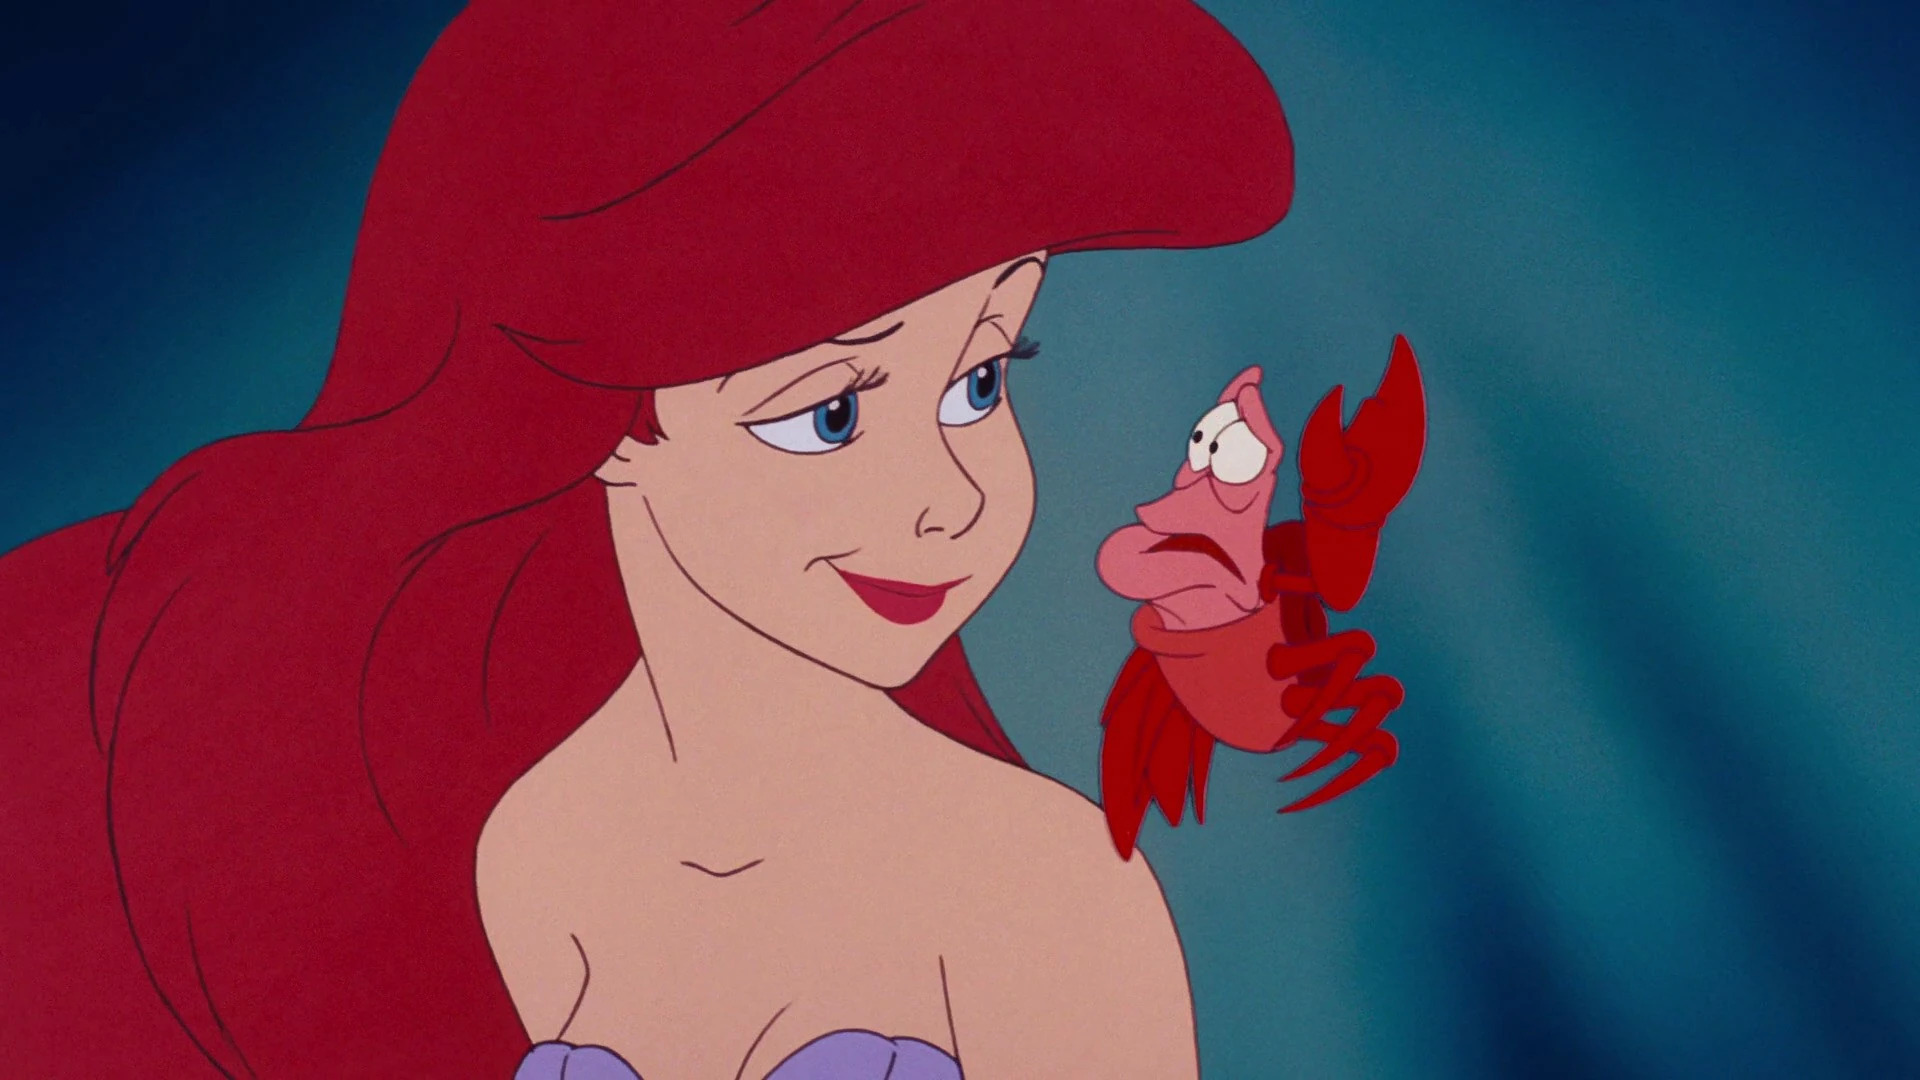 Get Your First Hideous Look at Sebastian The Crab in Disney’s Live-Action The Little Mermaid